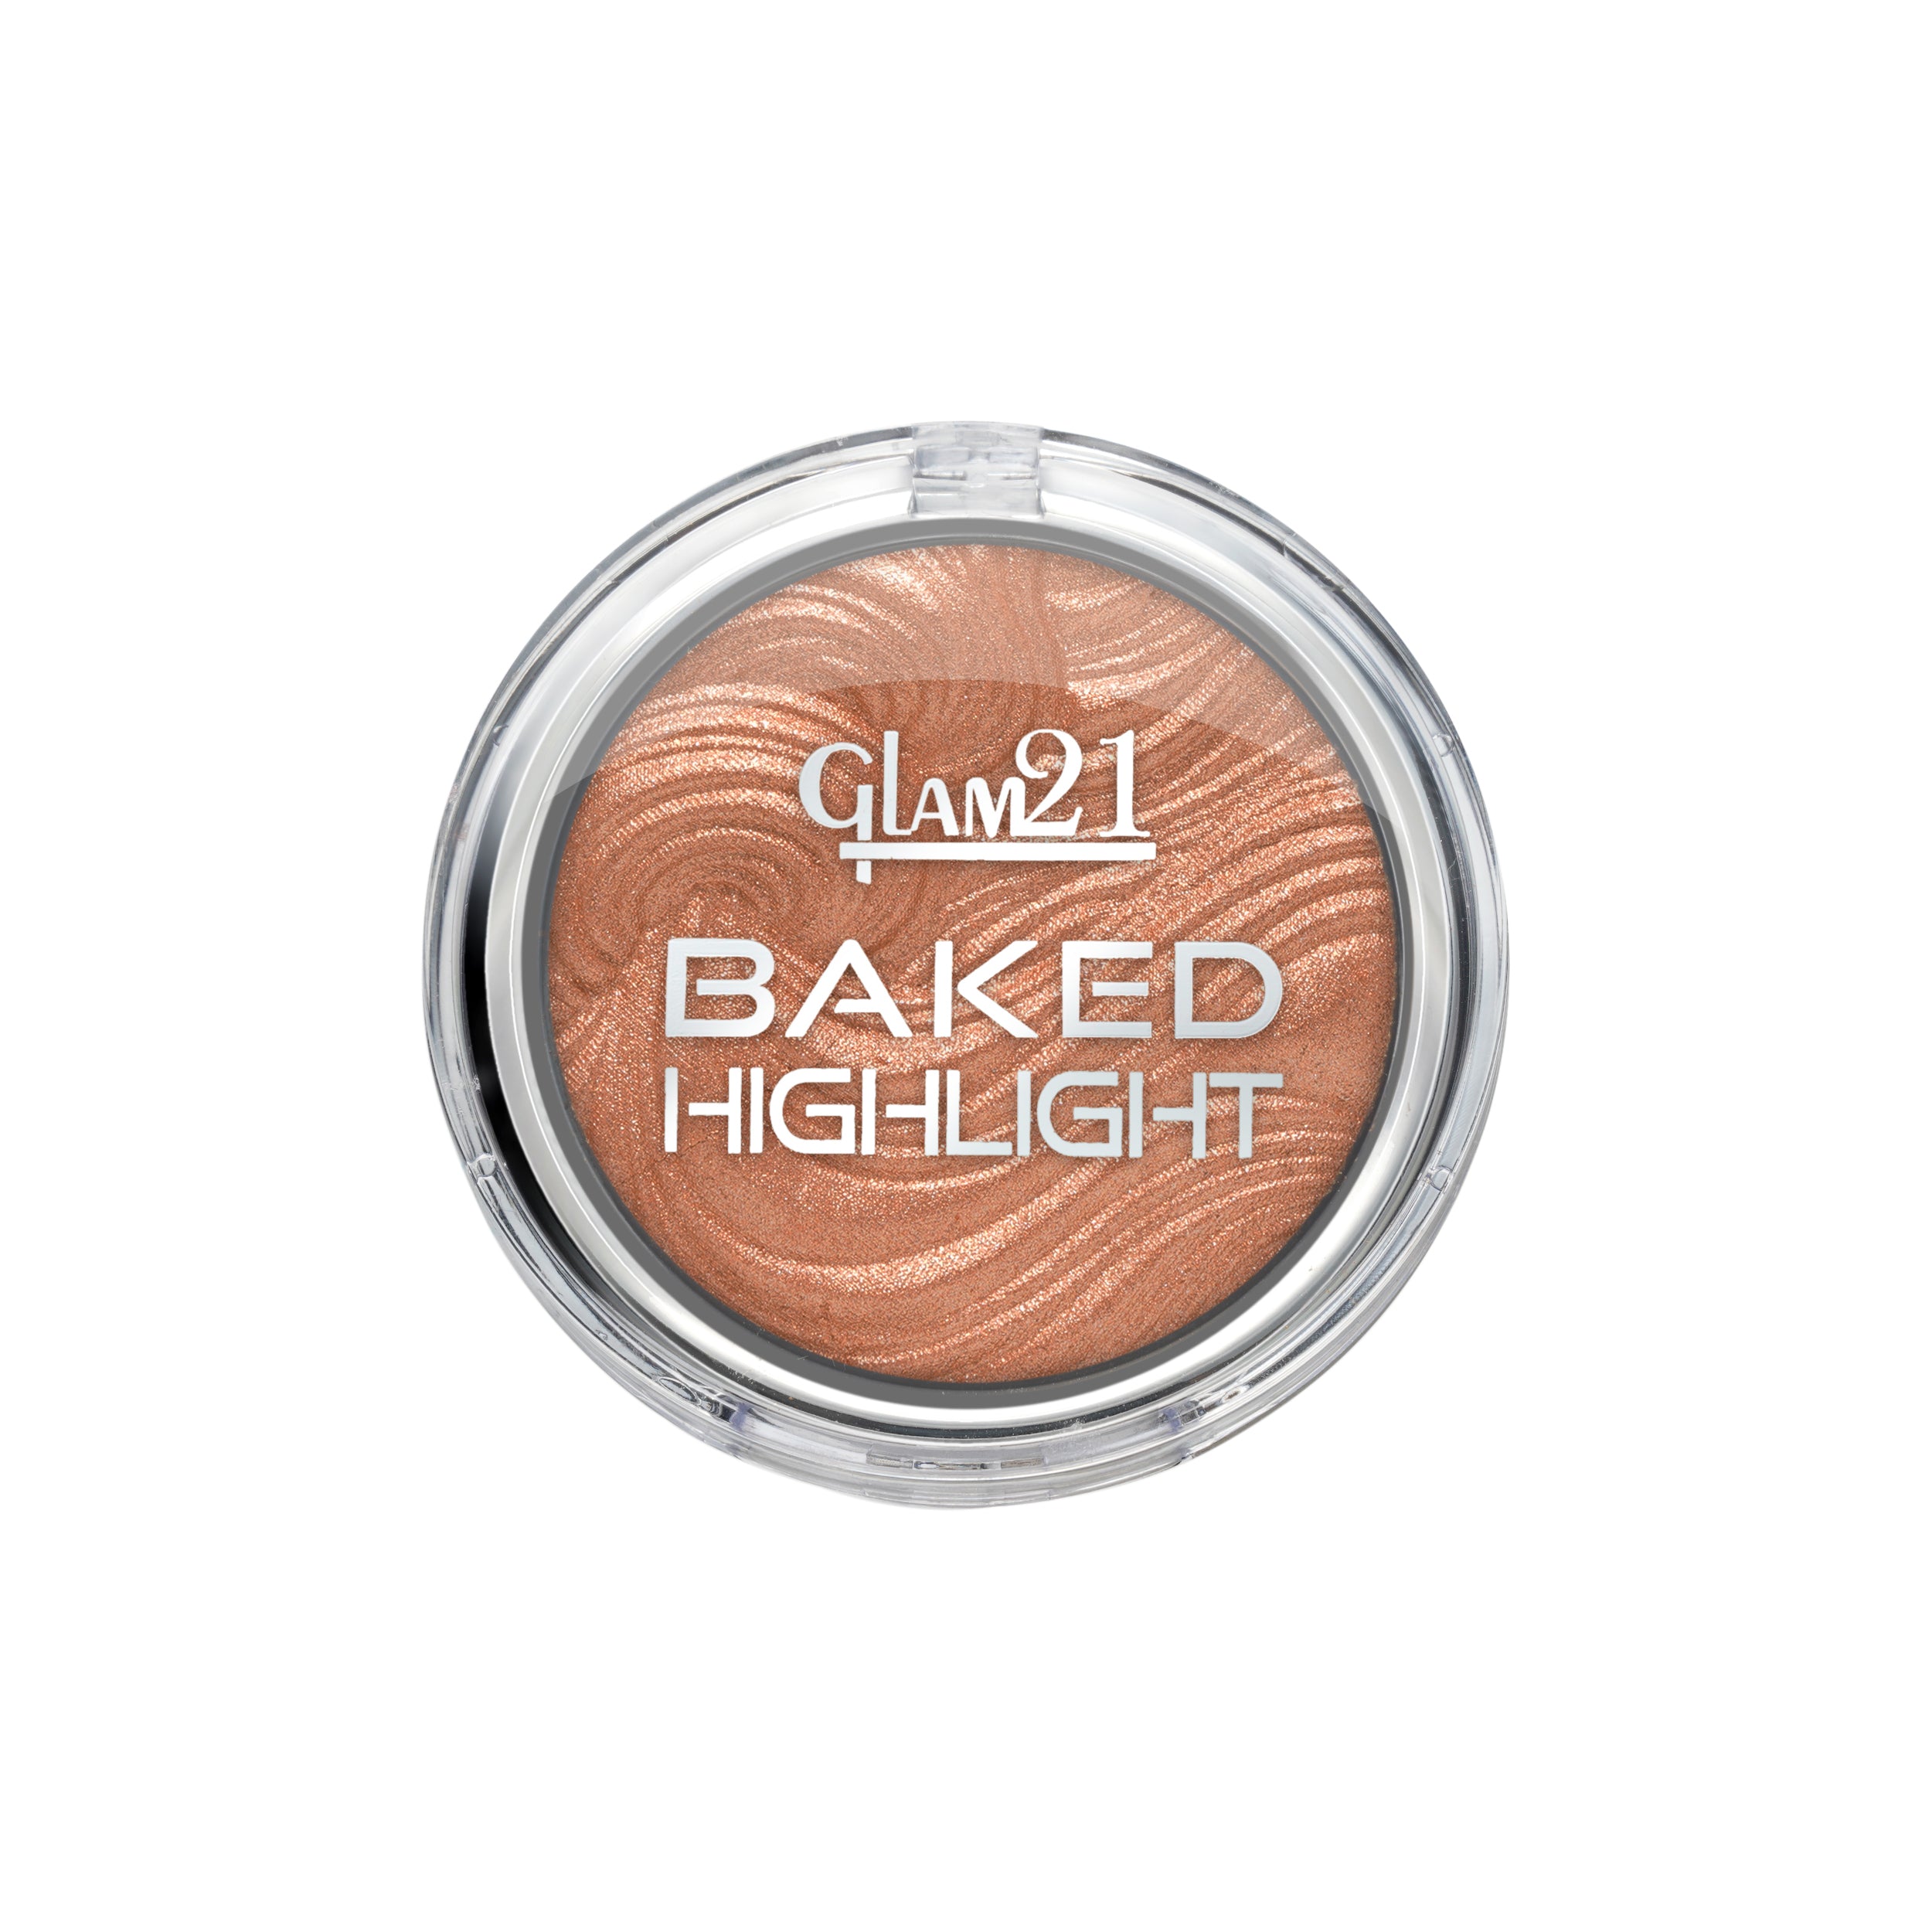 Glam21 Baked Highlighter with Silky Pigments Shimmer Look & Longlasting Mettalic Finish Highlighter, 2.8 g (Shade-05)